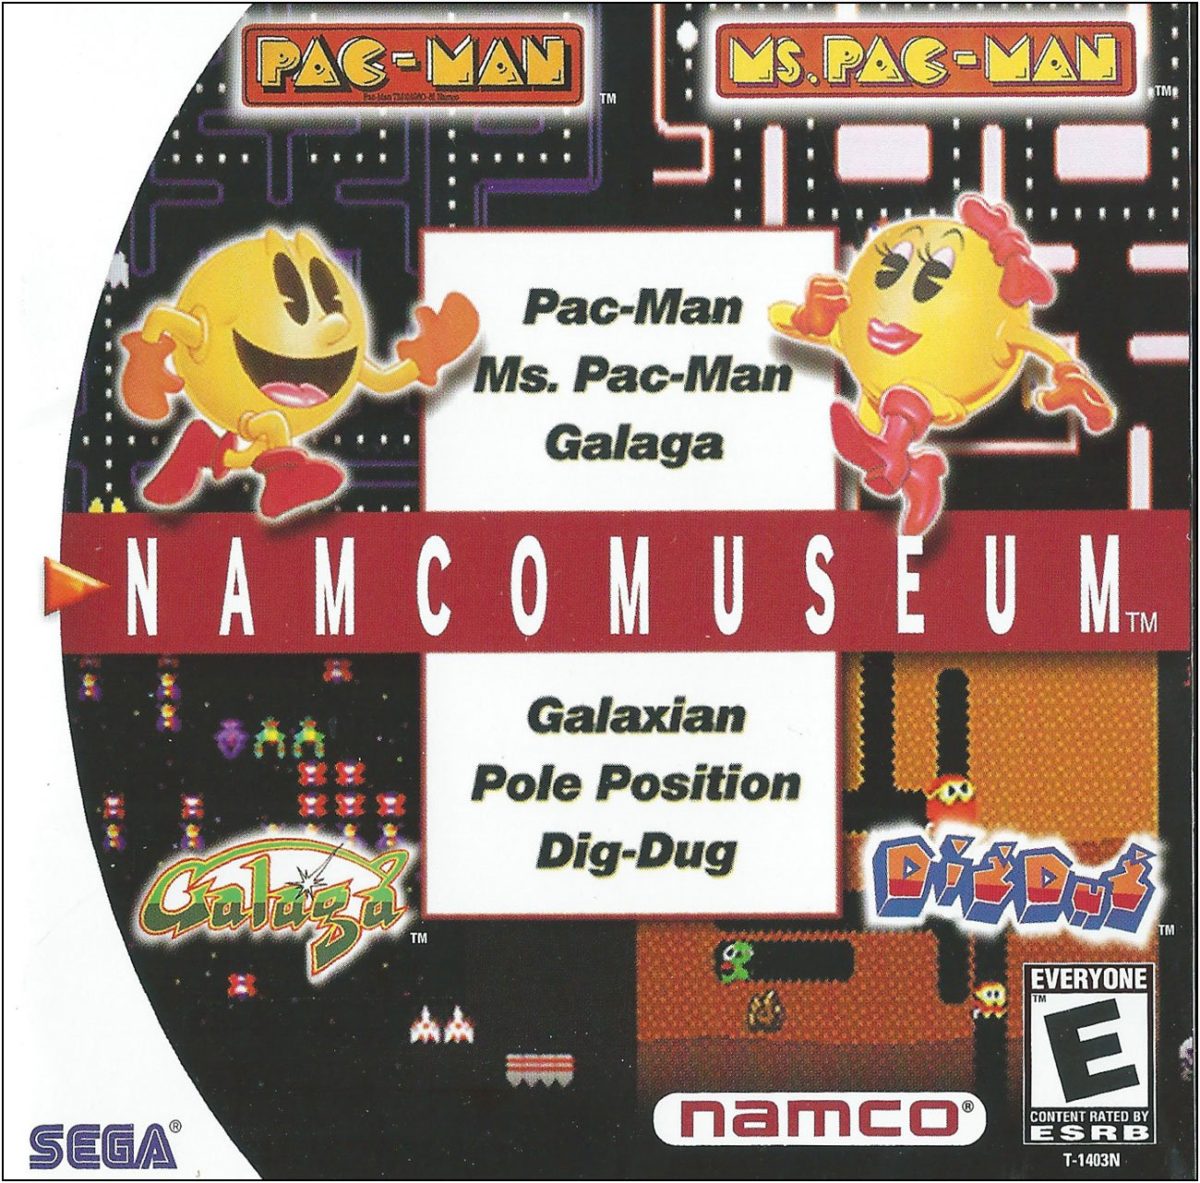 NAMCO Museum Vol. 1 player count stats